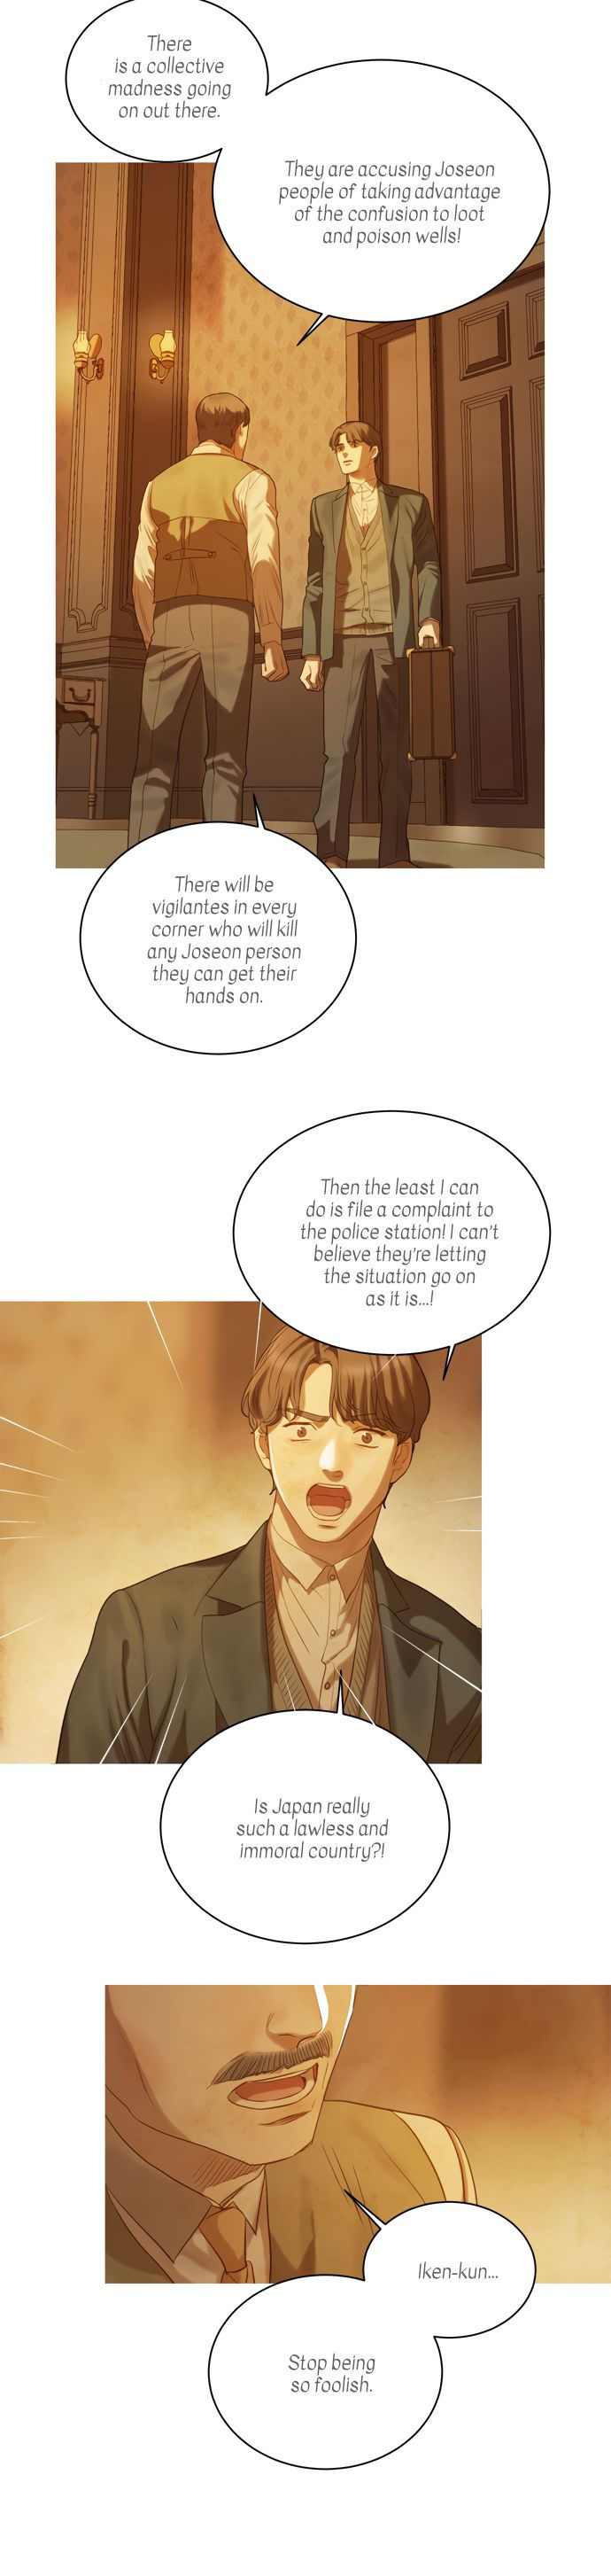 Gorae Byul - The Gyeongseong Mermaid - Chapter 22 Page 22